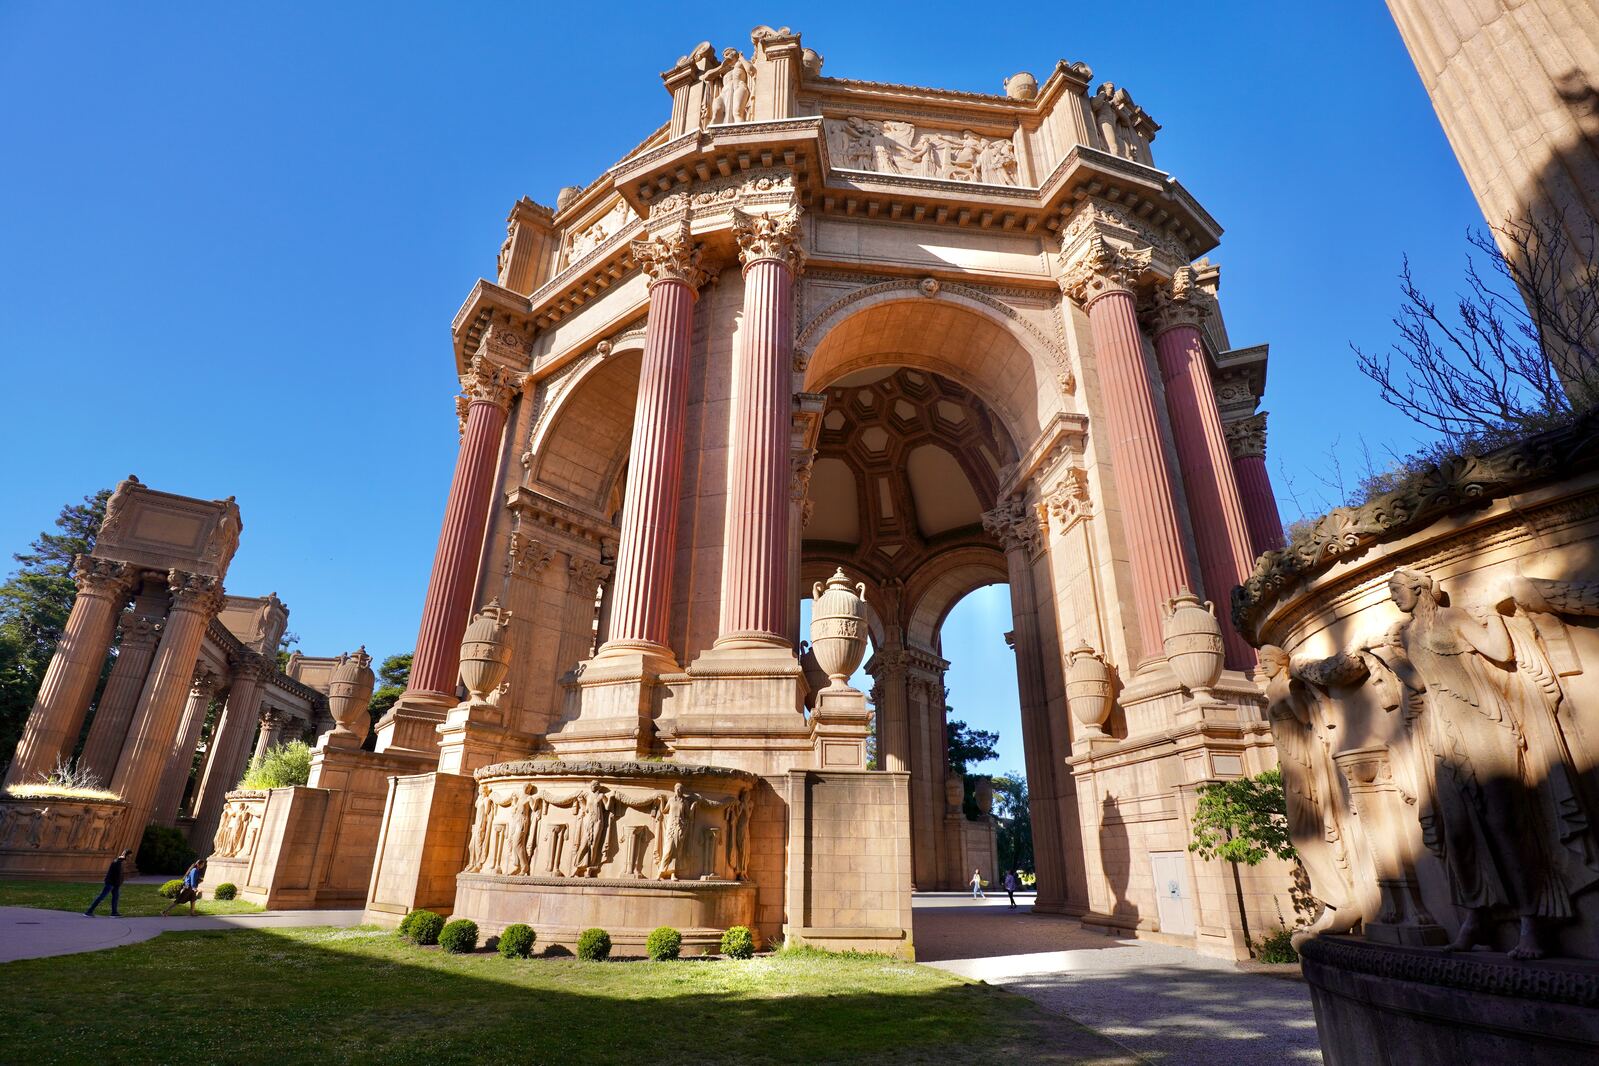 Image of The Palace of Fine Arts by Team PhotoHound